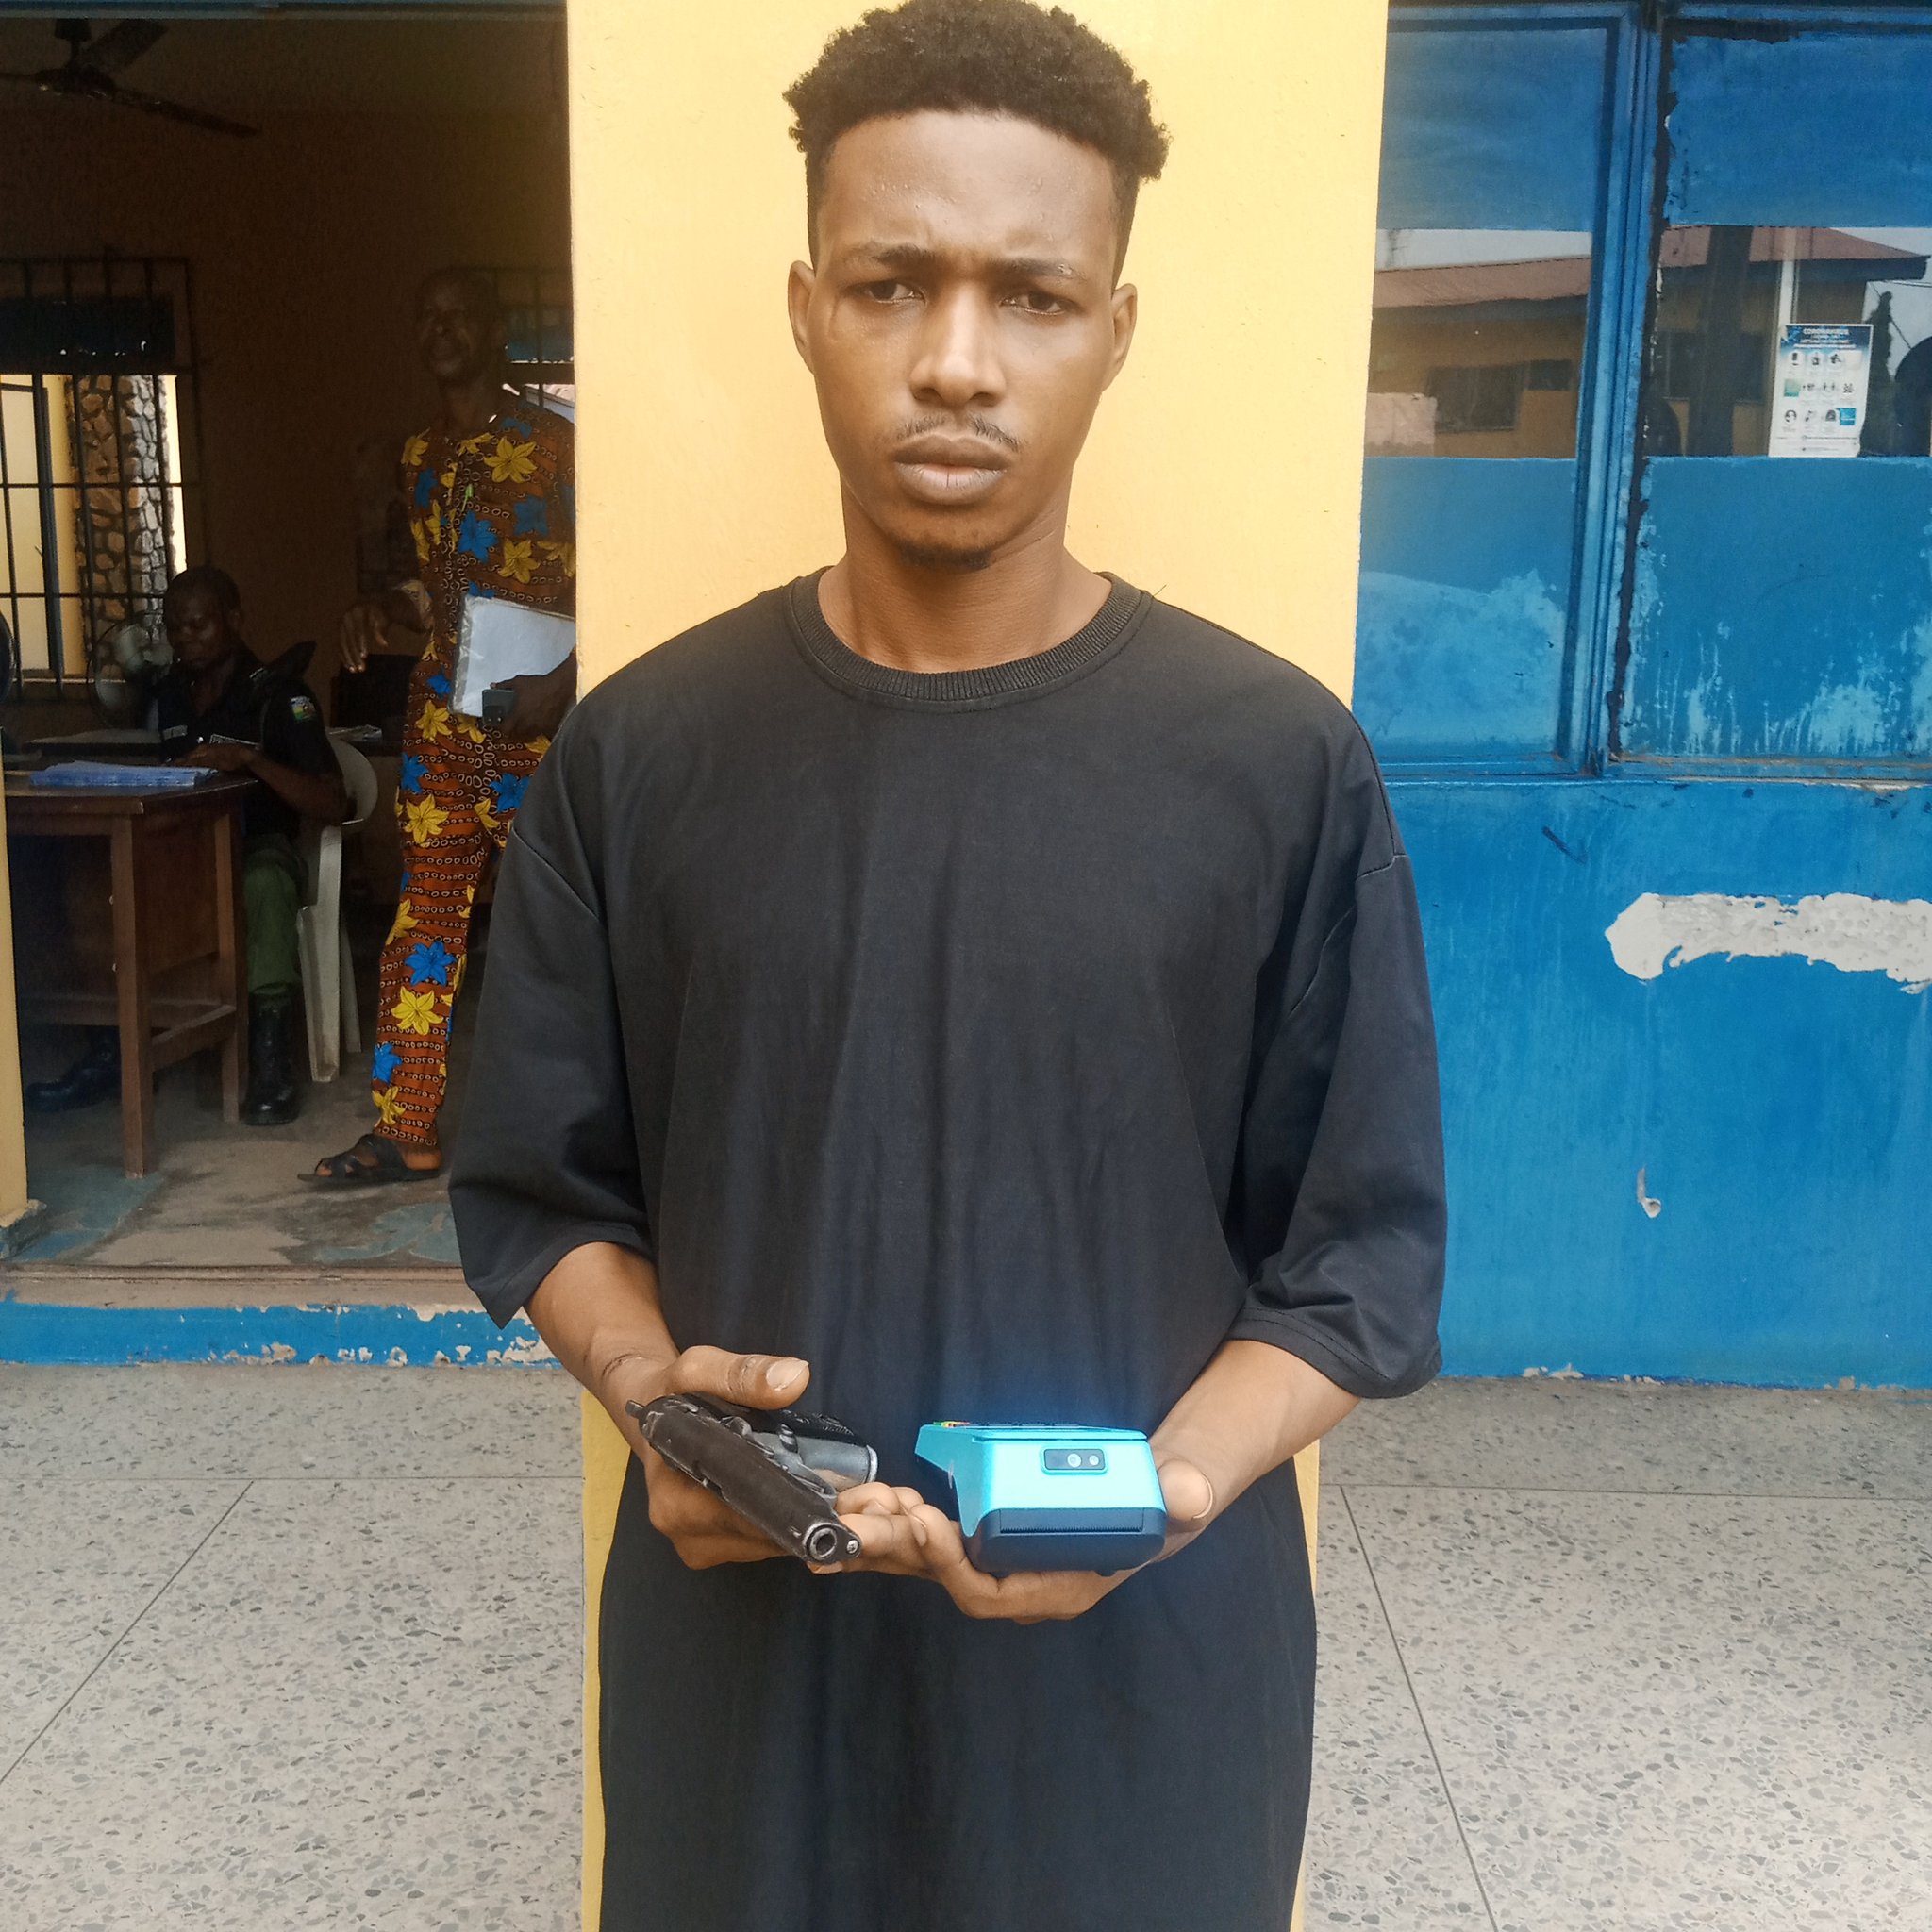 Operatives of the Edo State Police Command have arrested a 22yearold